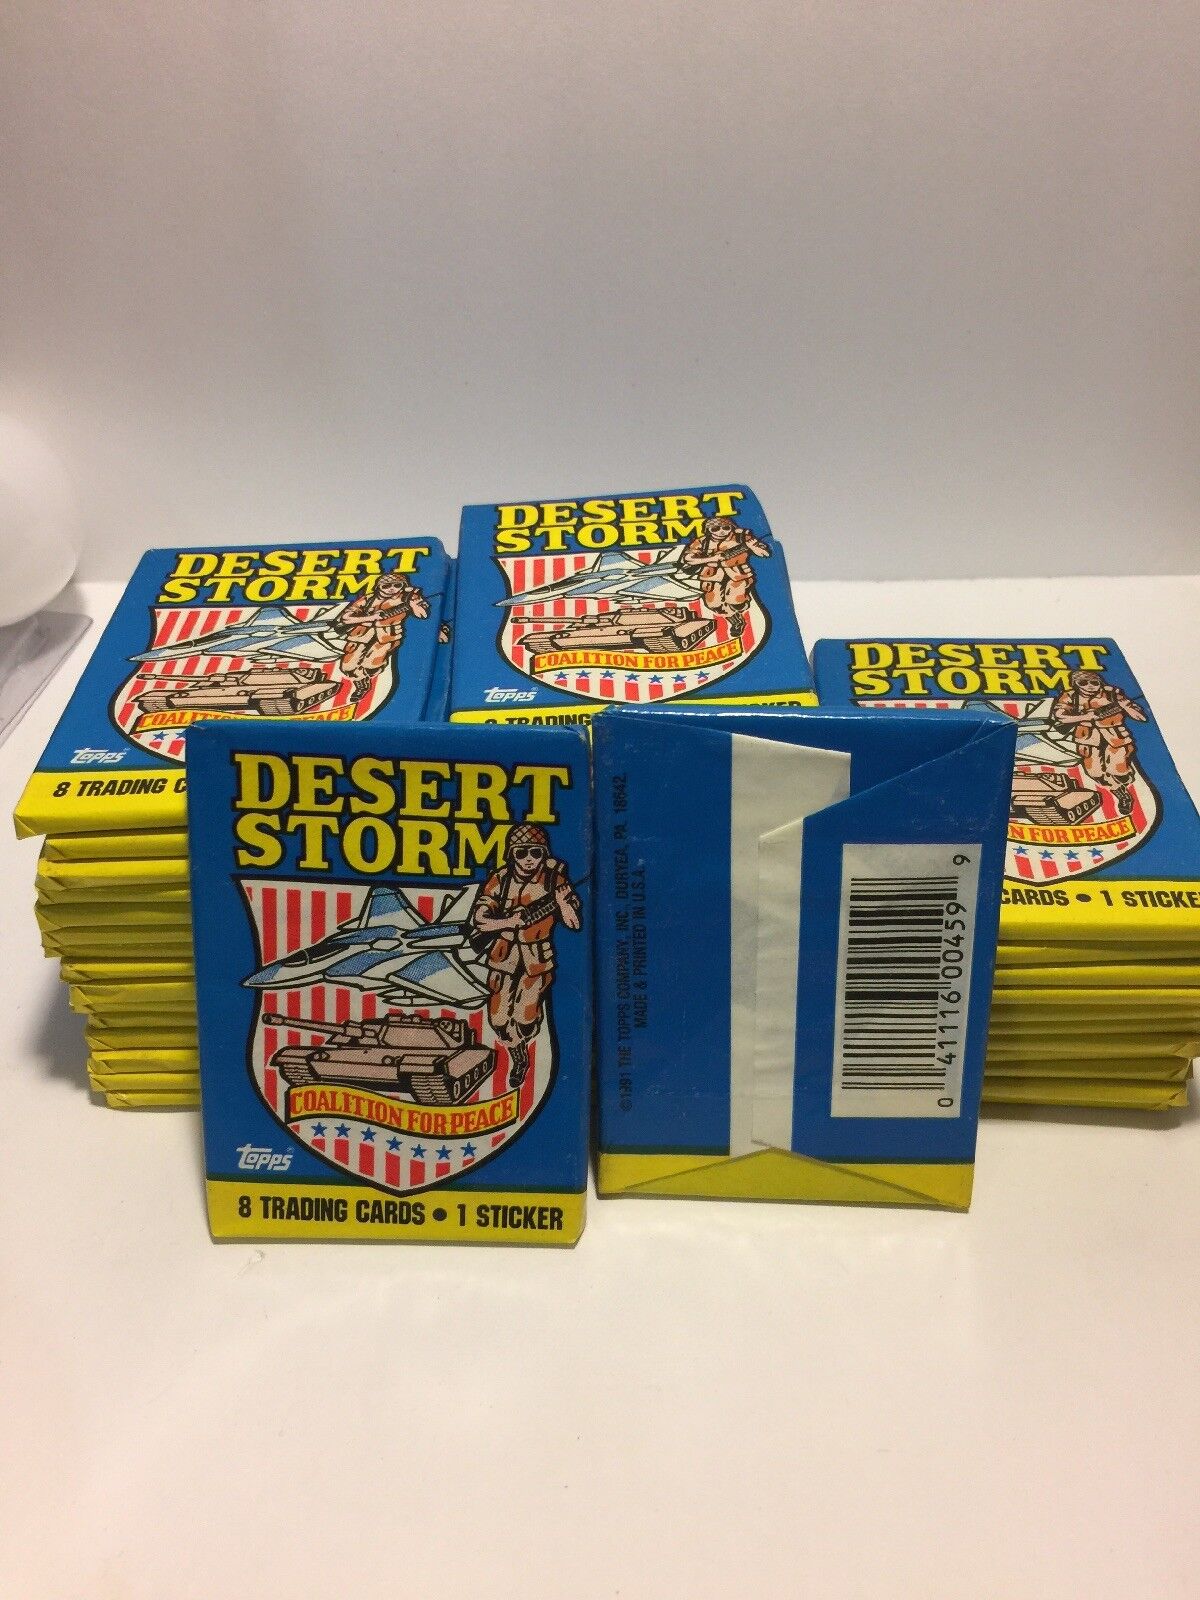 Desert Storm trading cards this auction is for single packs.